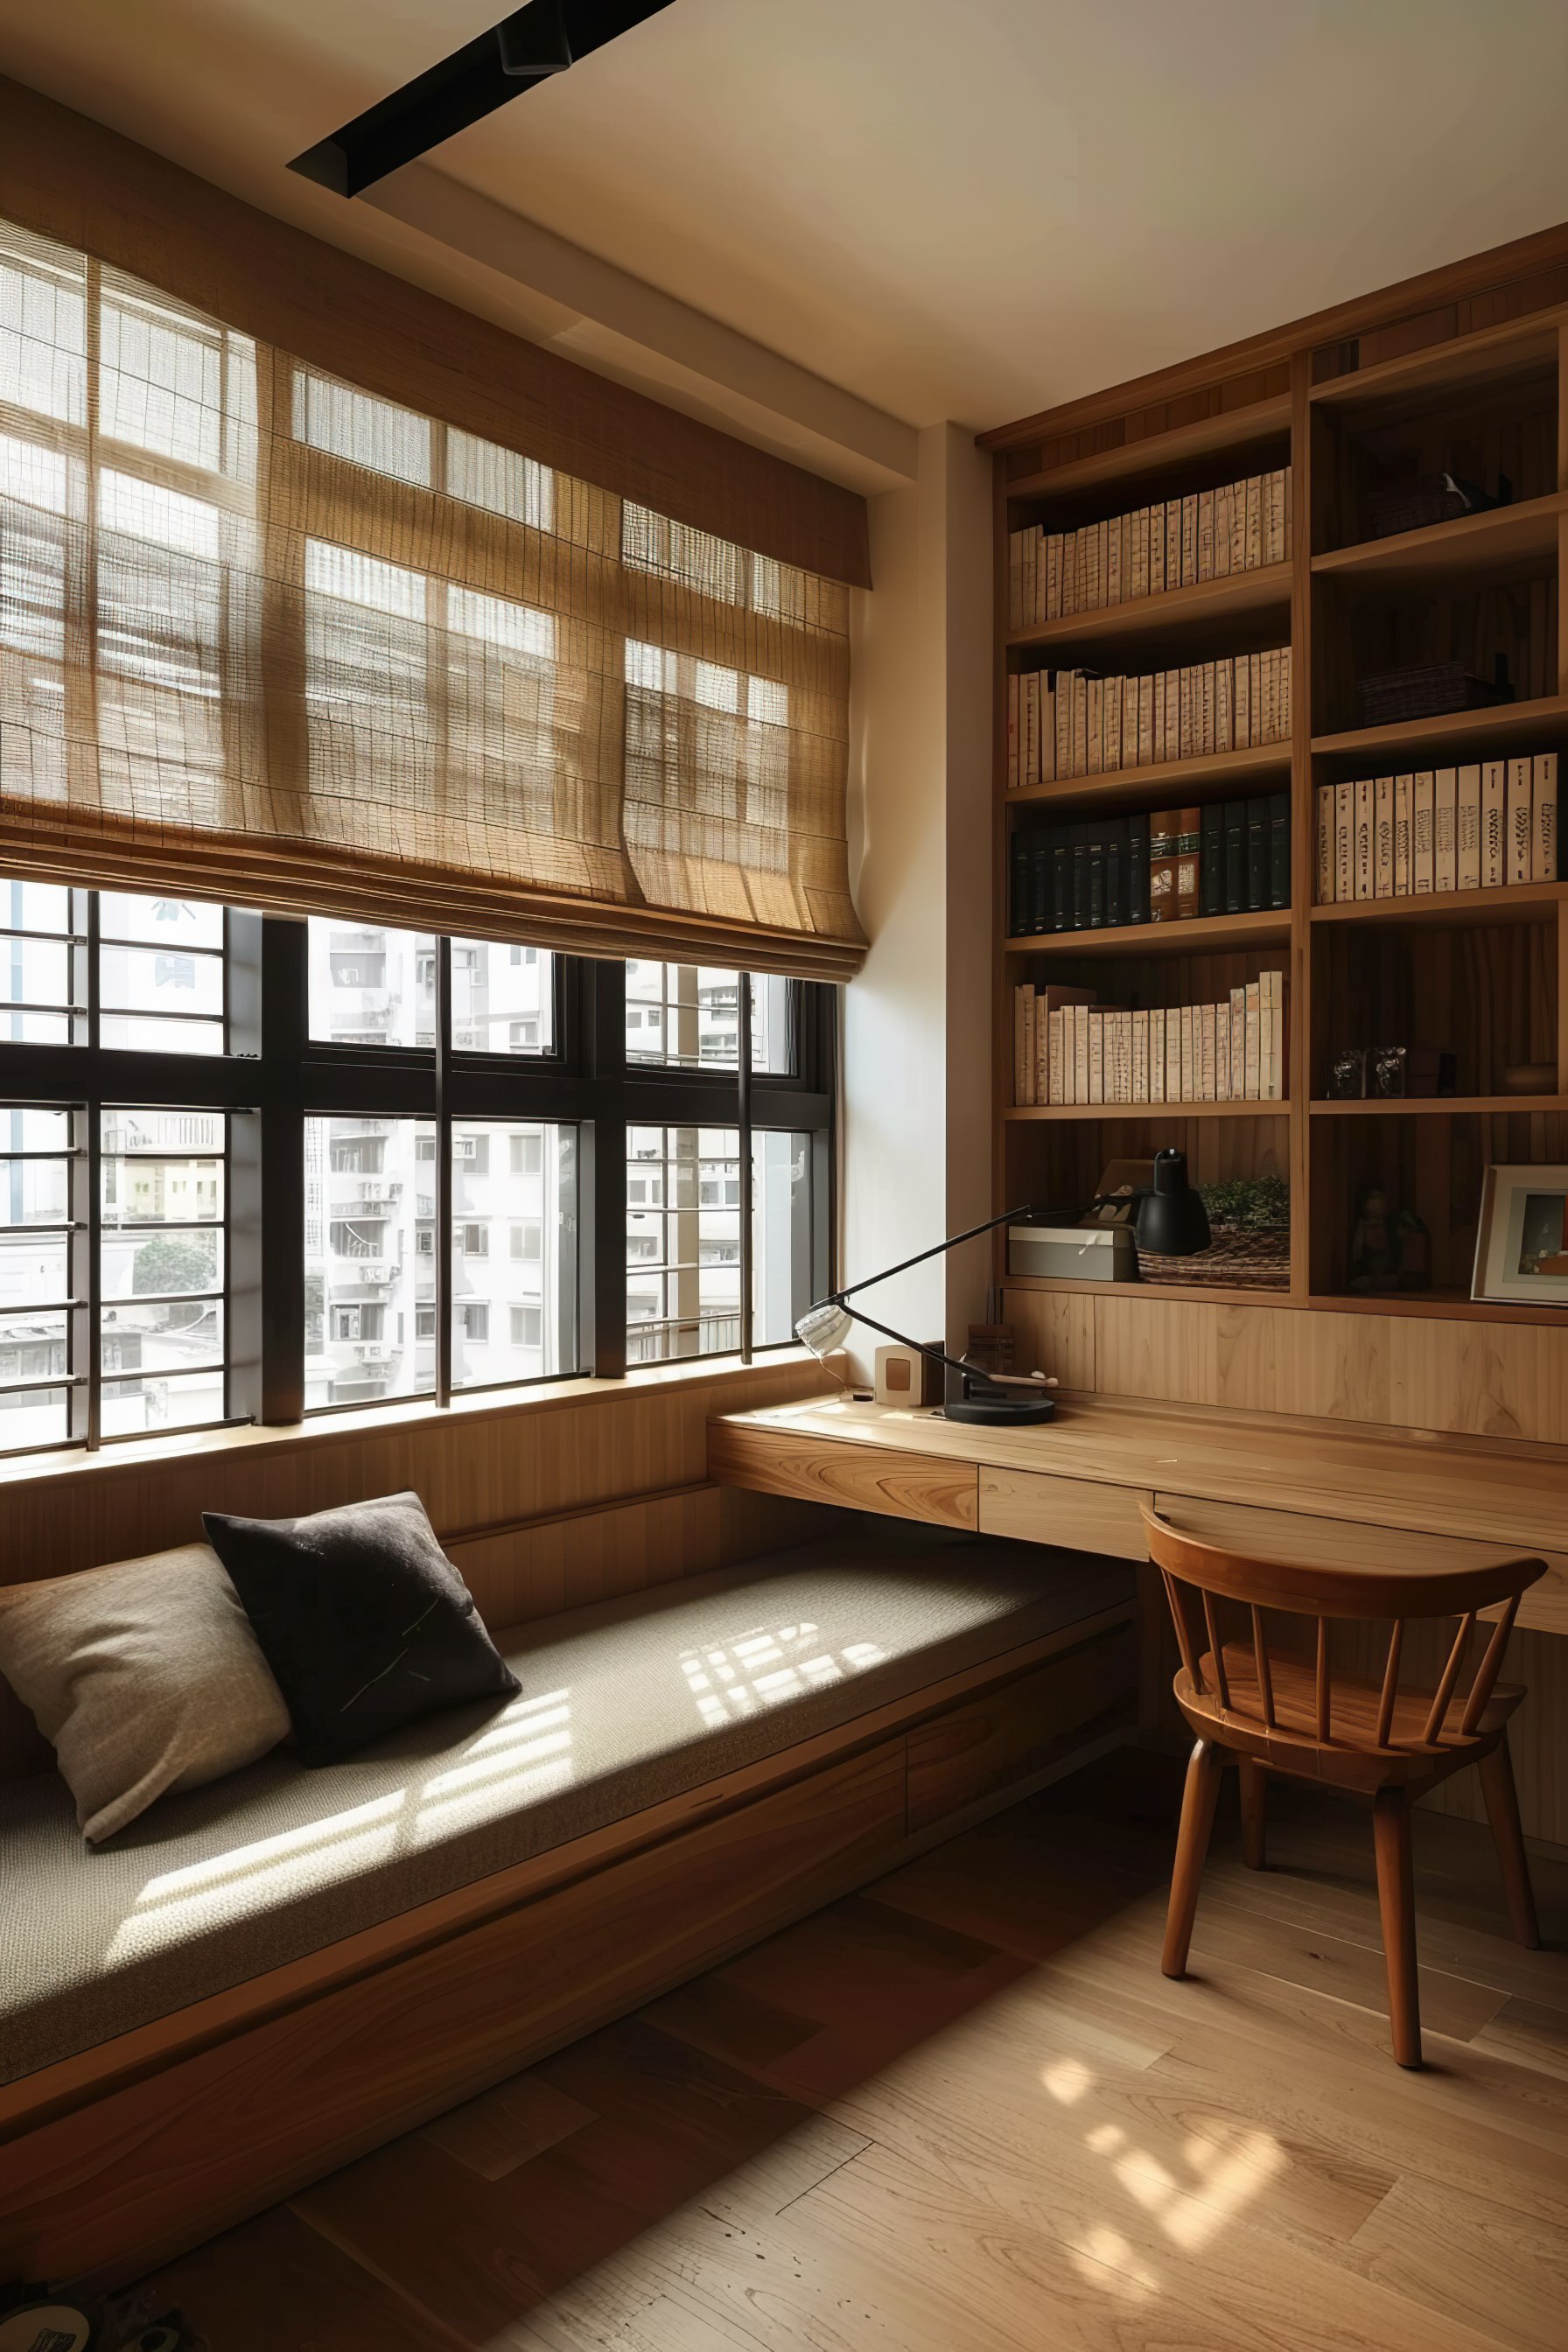 Cozy home study with large windows, wooden bookshelves, a desk with a lamp, and a cushioned bench with pillows.